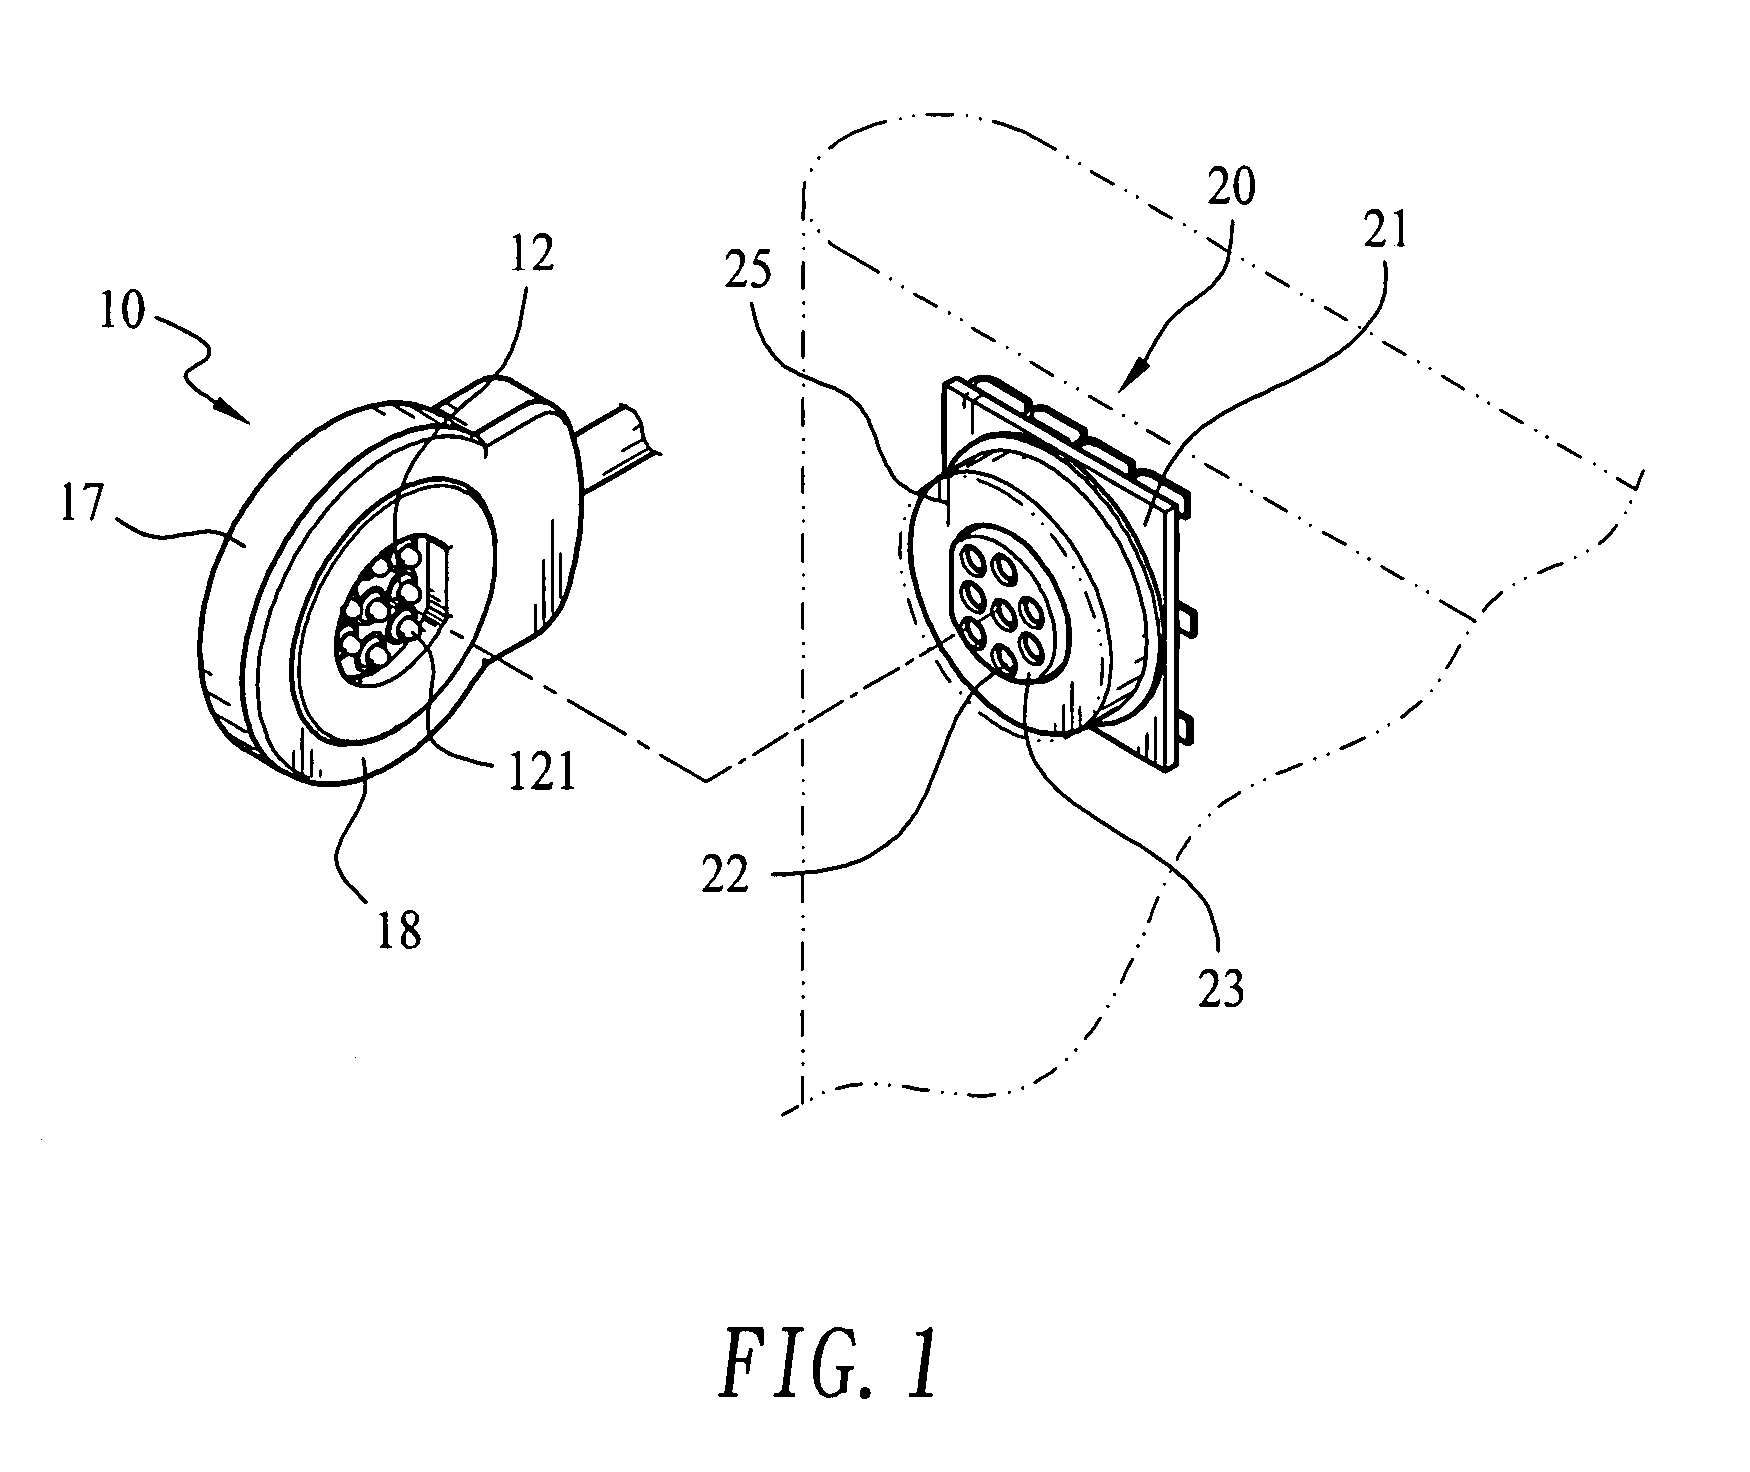 Electrical signal transmission connector assembly with magnetically connected receptacle and plug